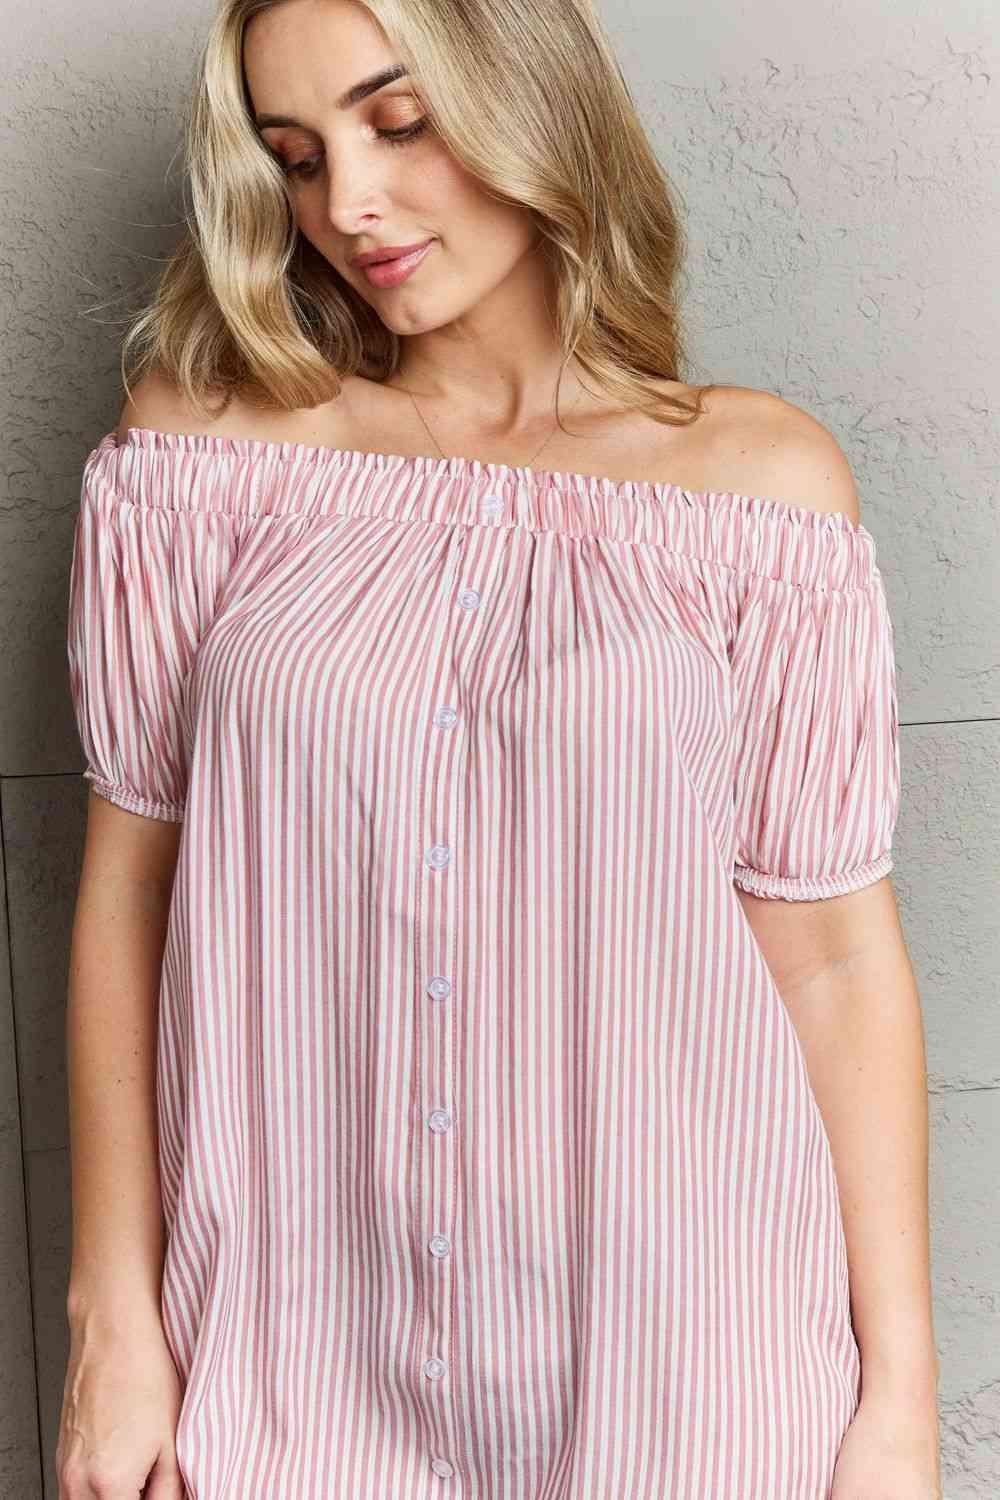 Ninexis Show Compassion Off The Shoulder Mini Dress - AMIClubwear